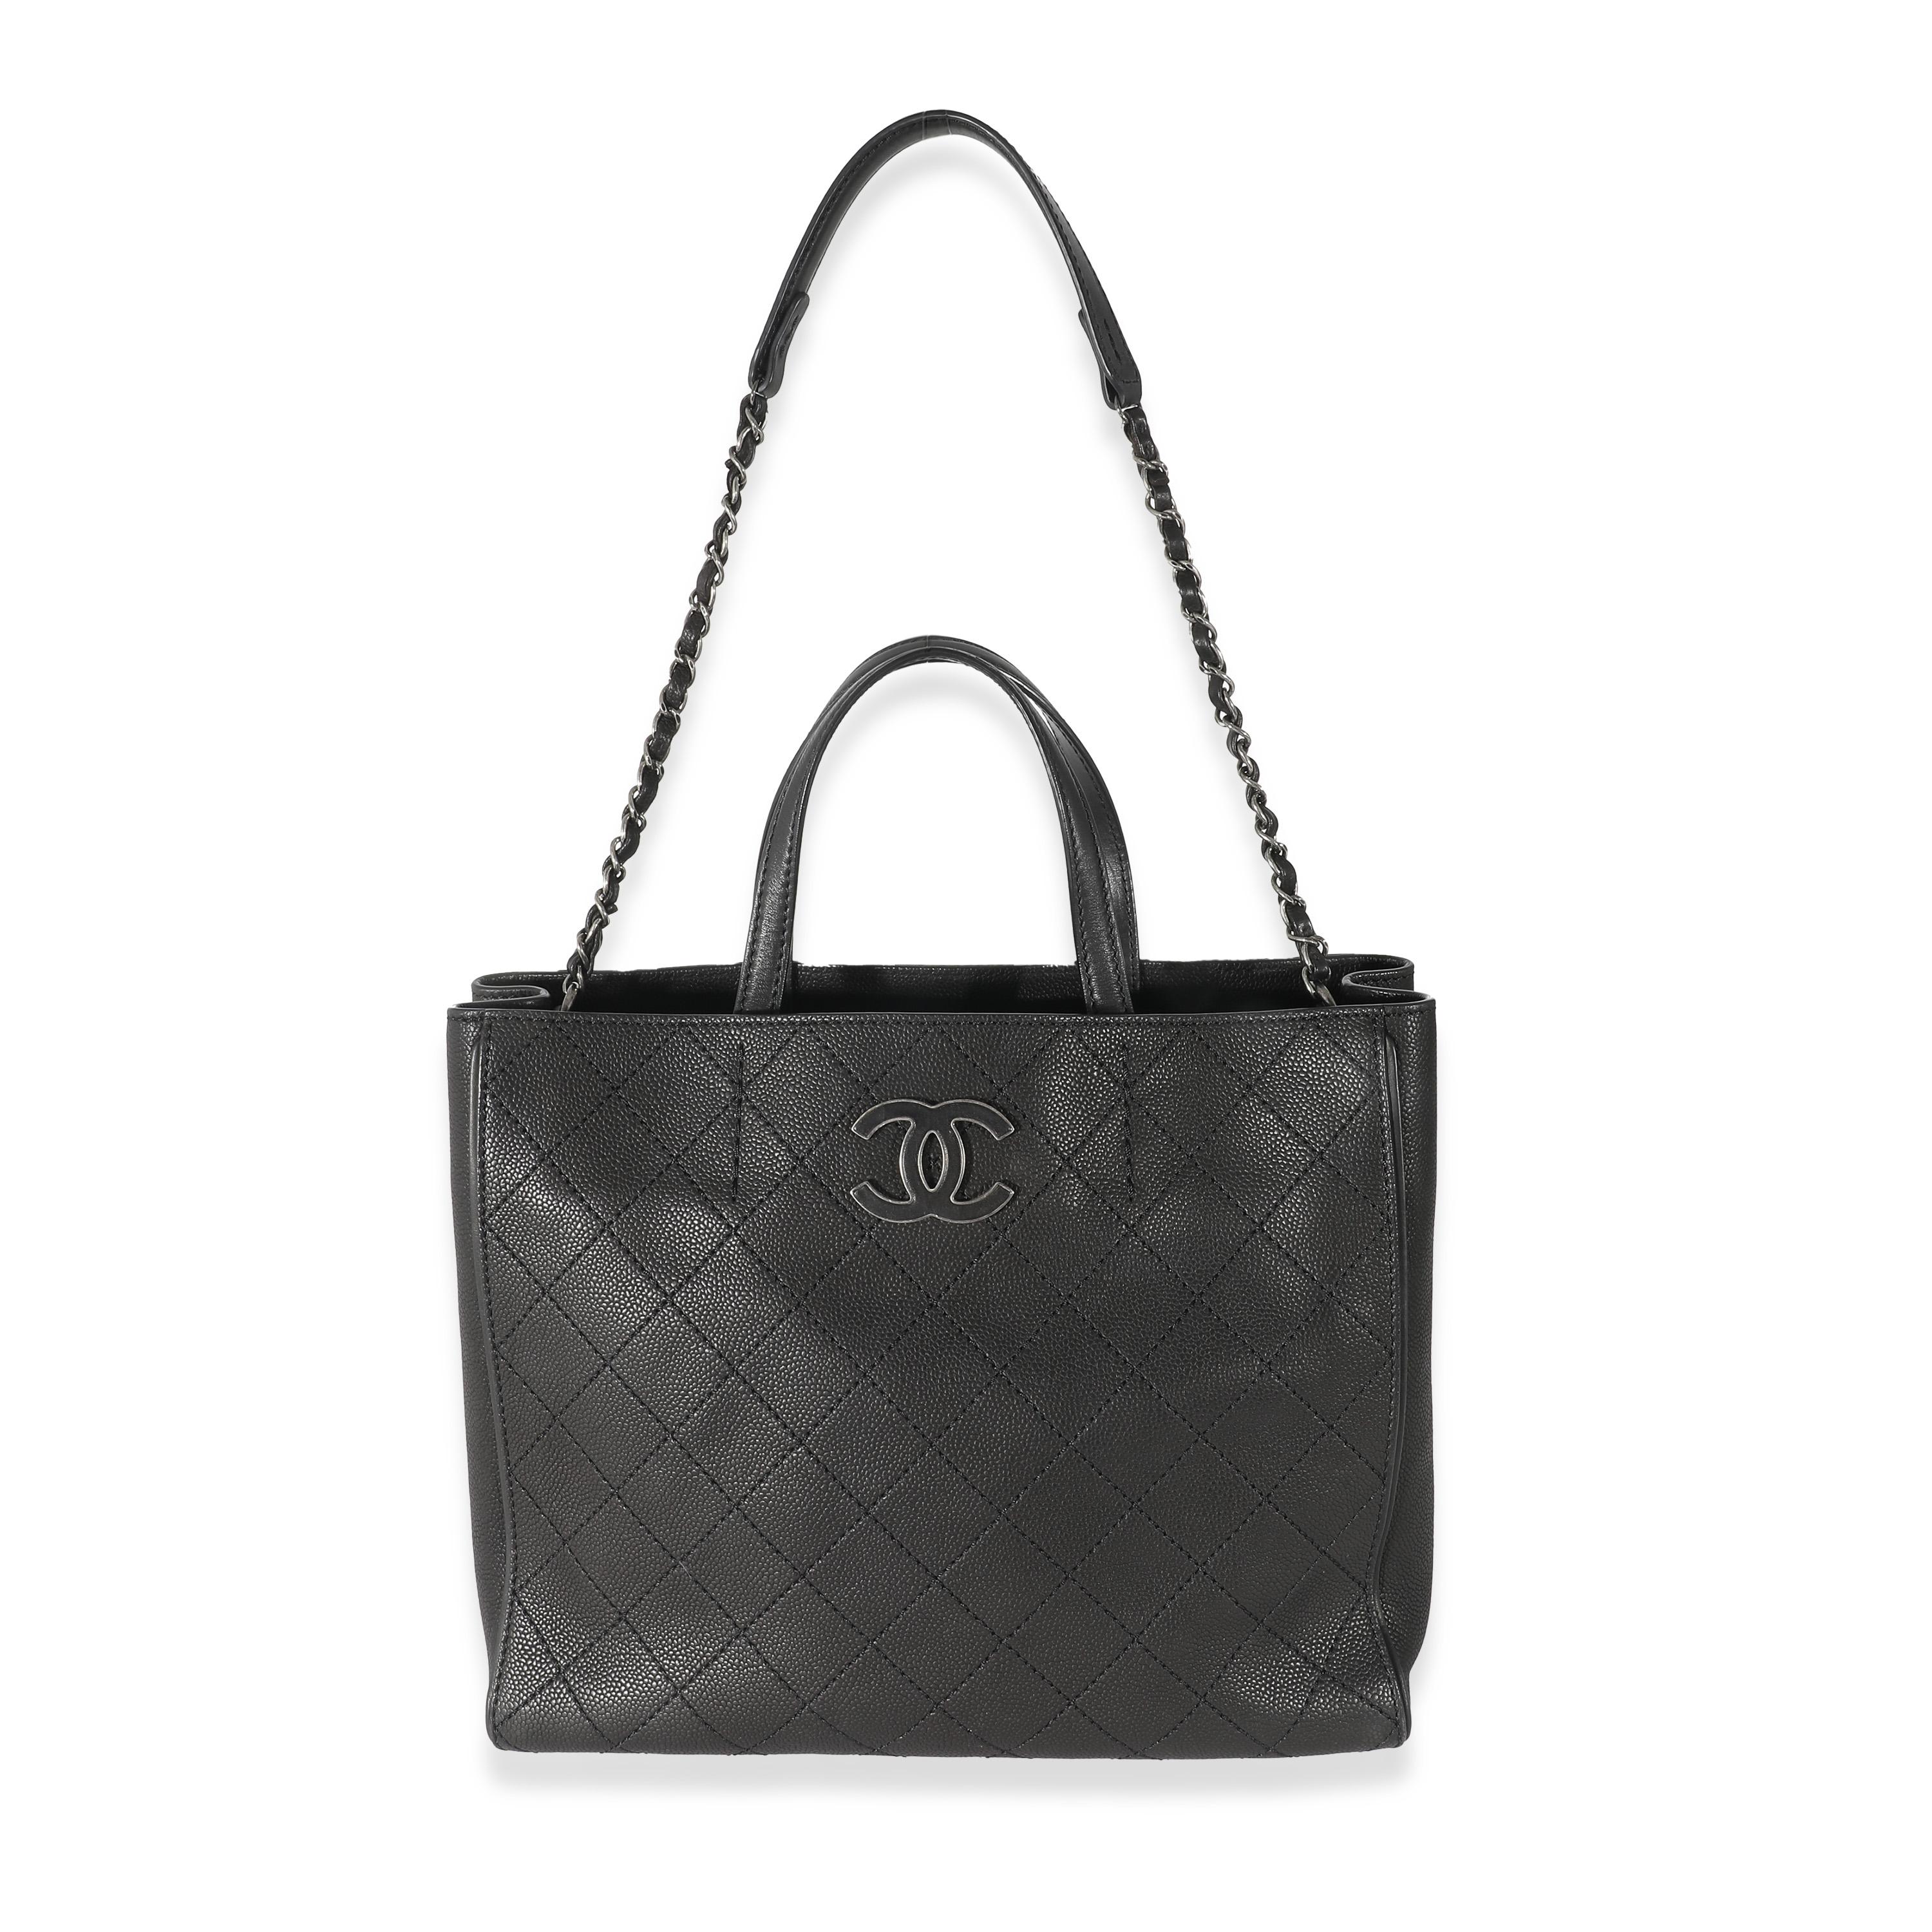 Listing Title: Chanel Black Stitched Grained Calfskin Hamptons Tote
SKU: 132944
Condition: Pre-owned 
Handbag Condition: Very Good
Condition Comments: Item is in very good condition with minor signs of wear. Light scuffing along corners, exterior,